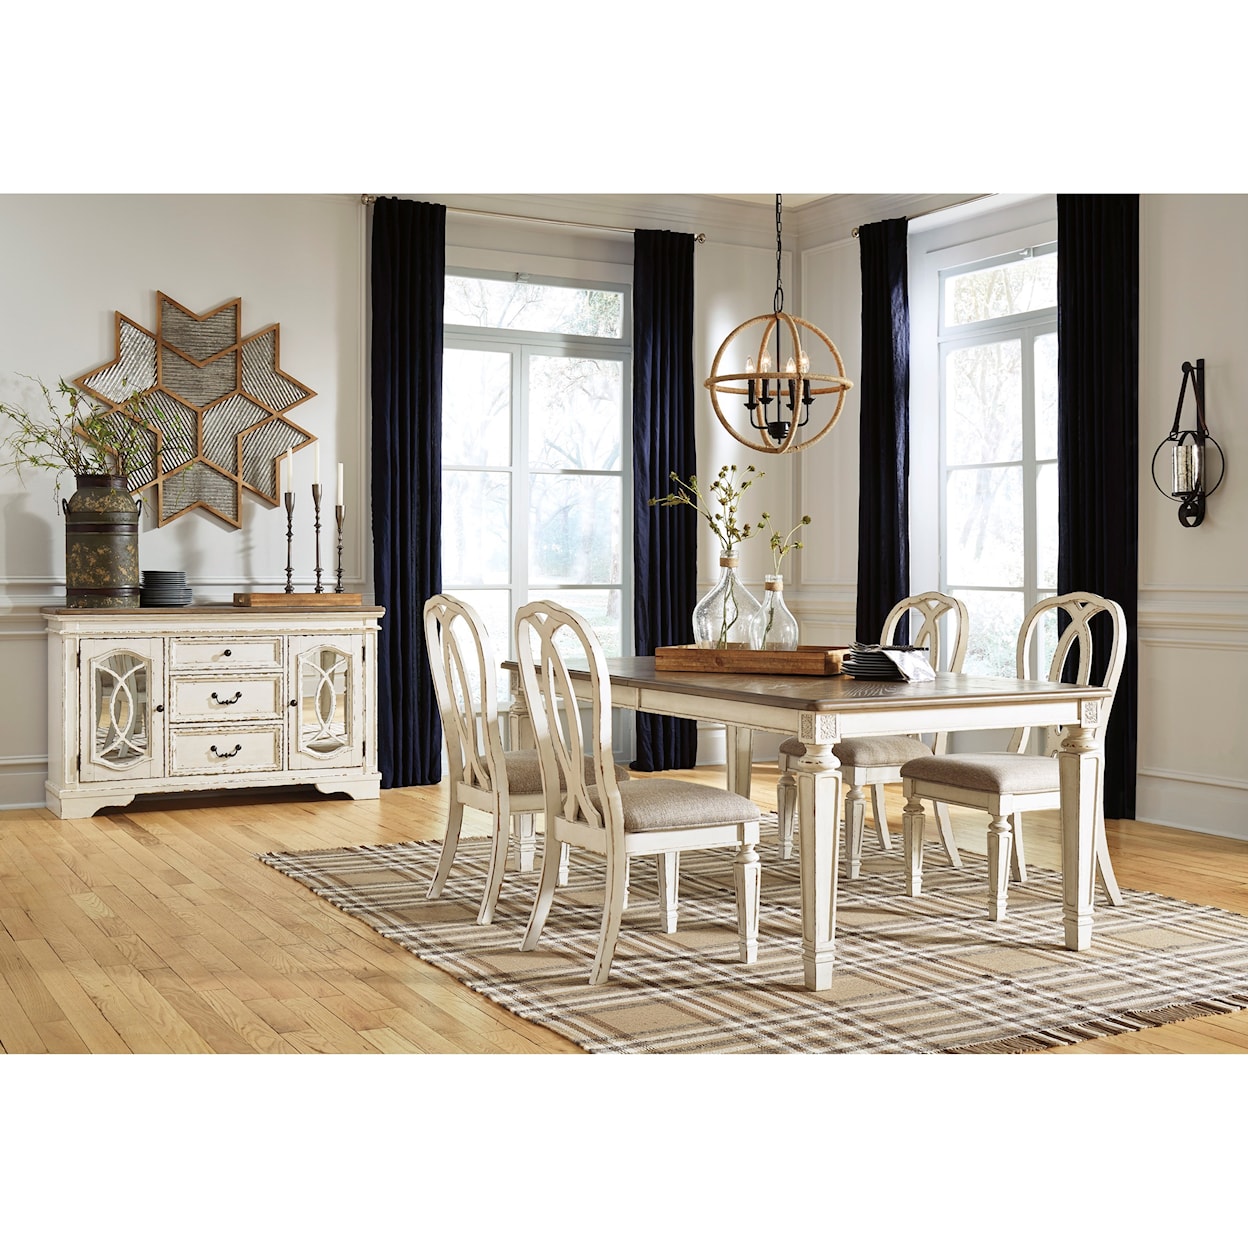 Signature Design by Ashley Realyn Casual Dining Room Group